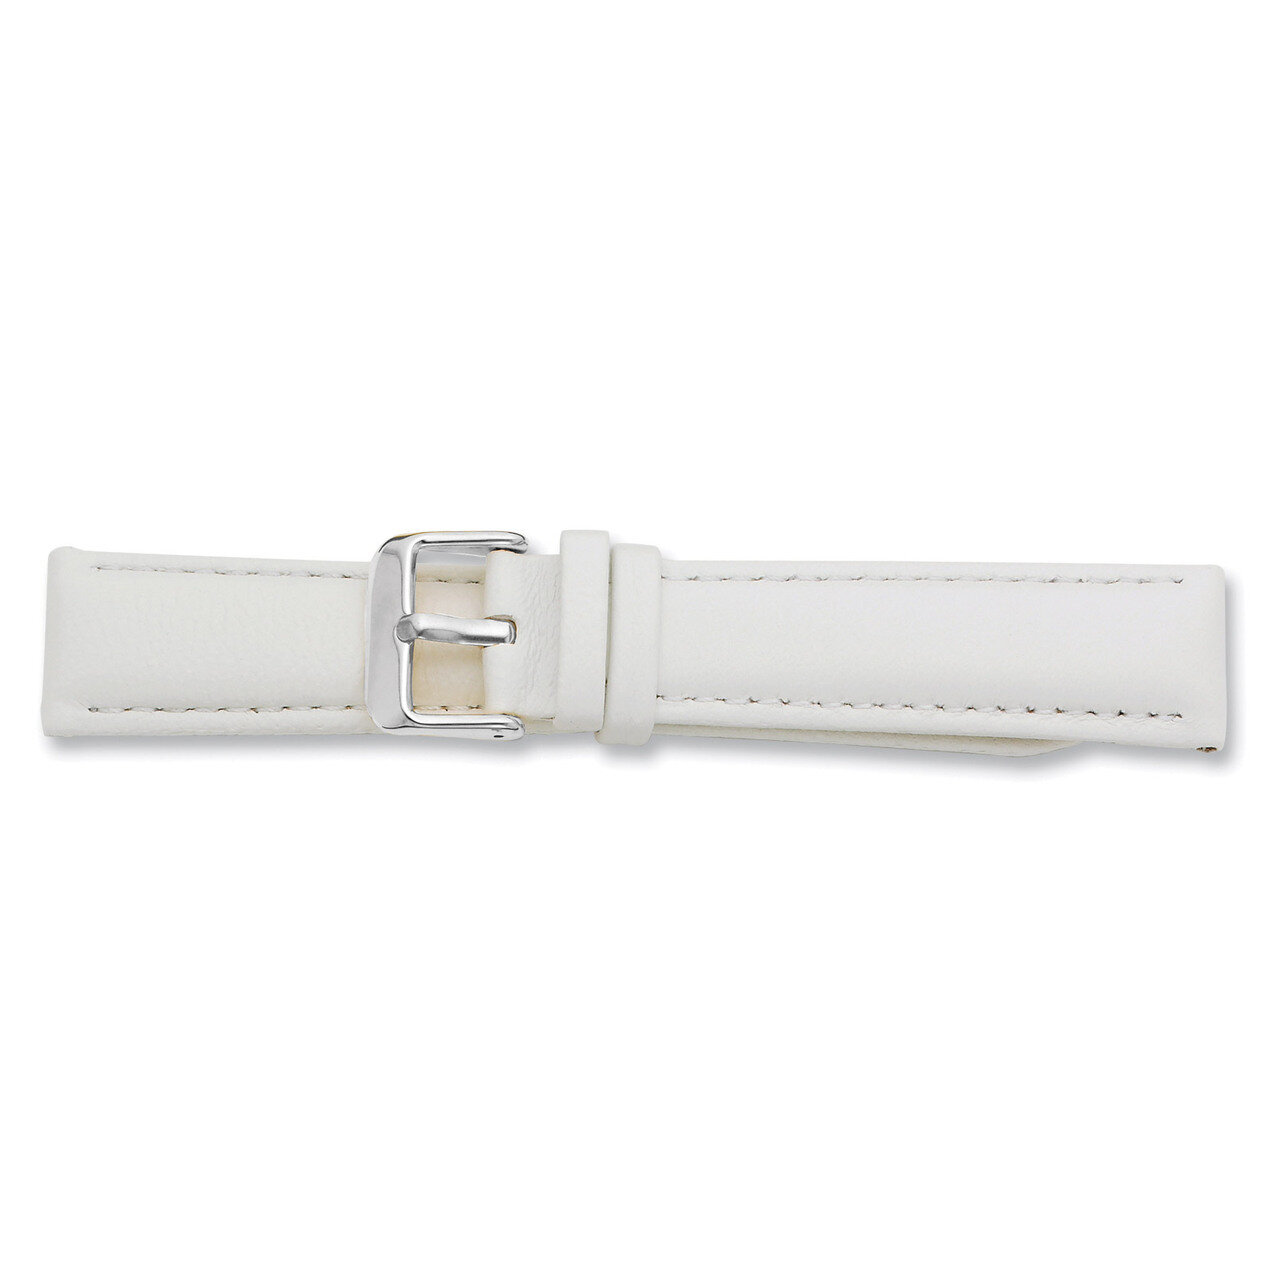 19mm White Glove Leather Watch Band 7.75 Inch Silver-tone Buckle BAW197-19